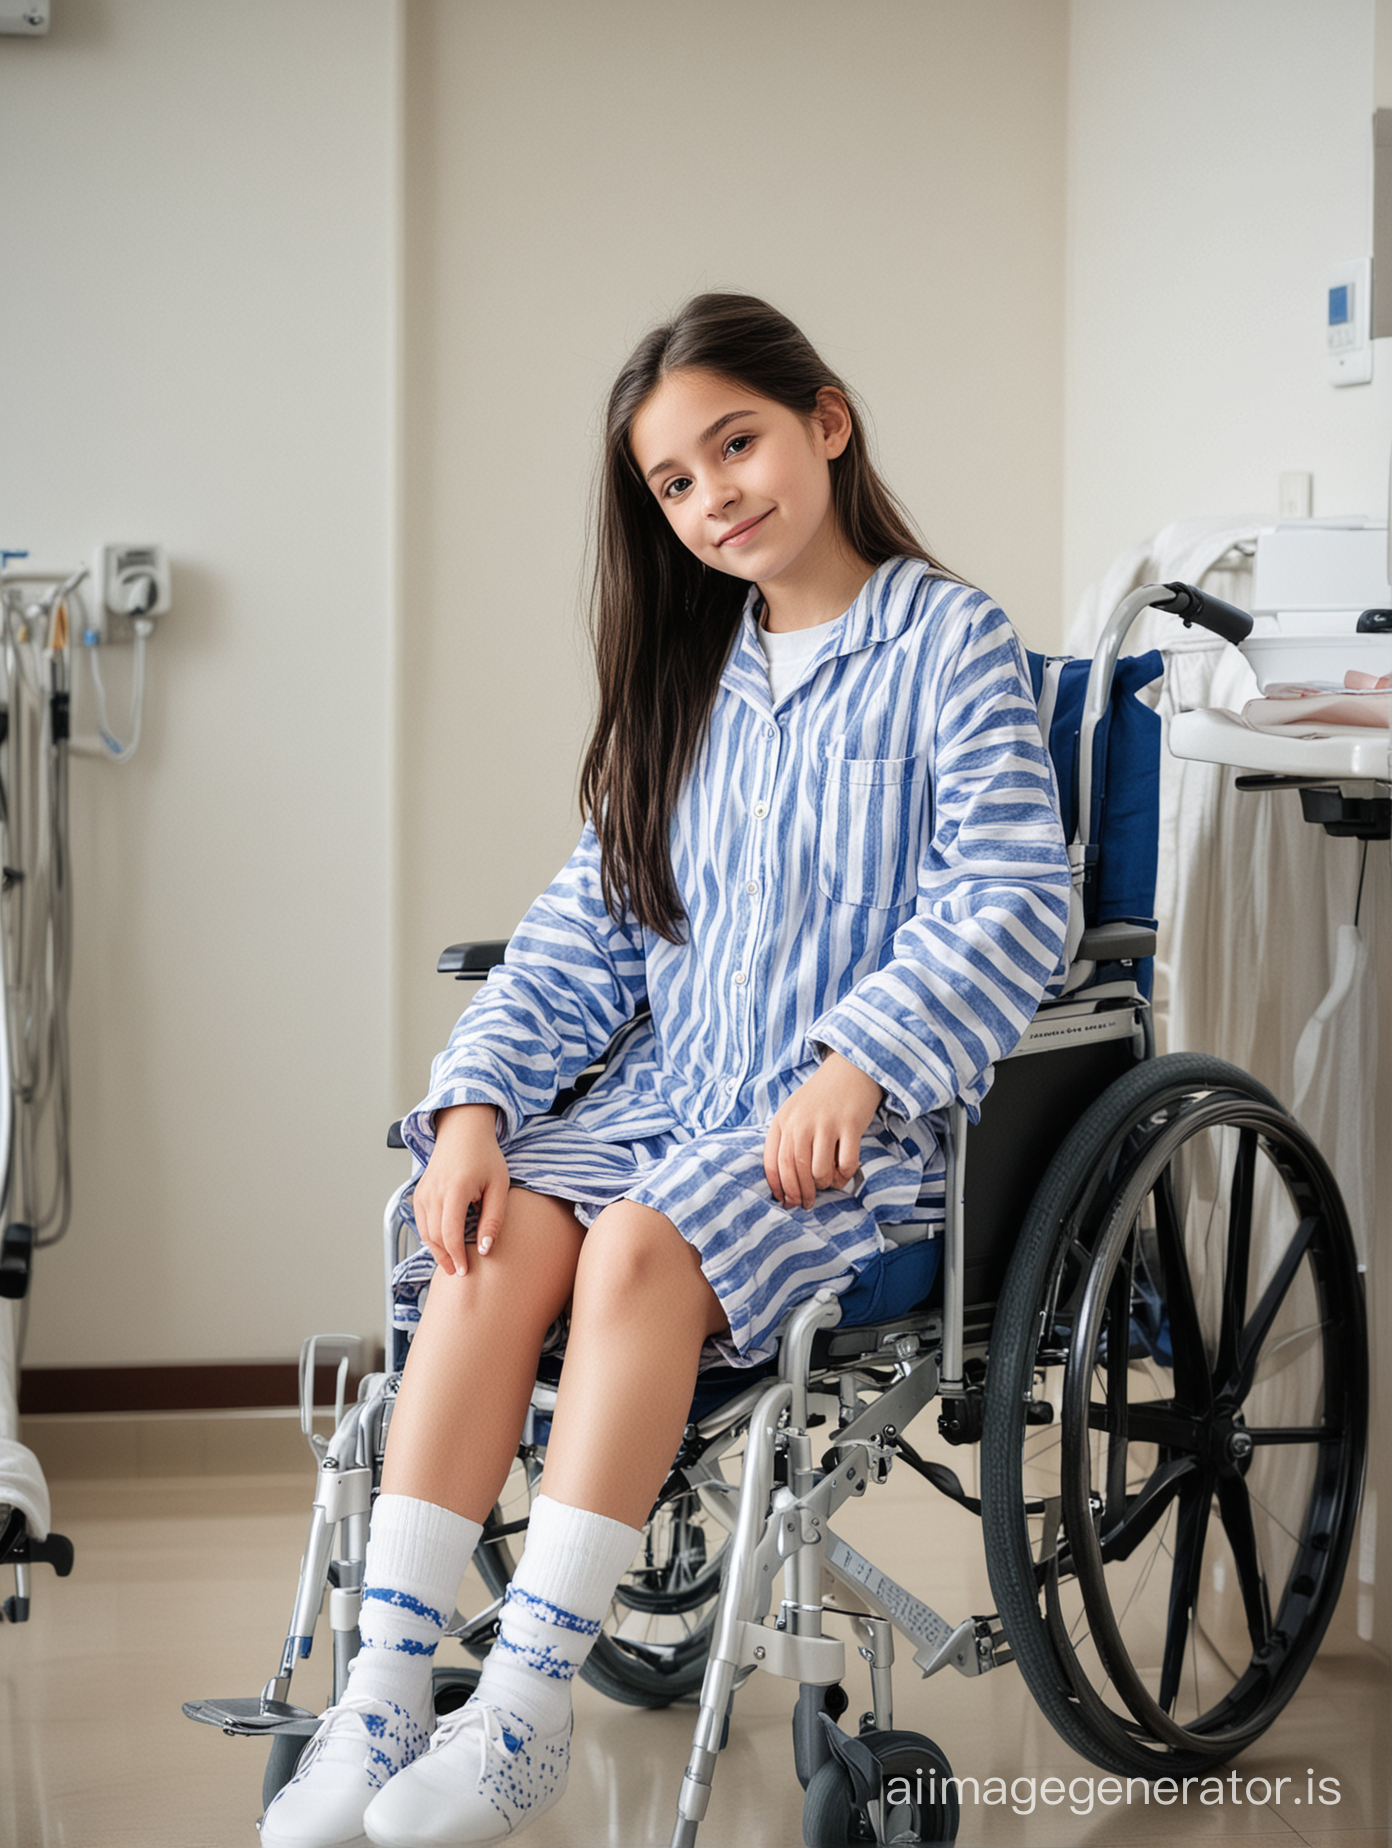 Cute, beautiful, pretty, sweety, glamour, dark hair 12 years old girl wearing blue striped pyjamas and white socks sitting in Wheelchair in hospital room  Full body view